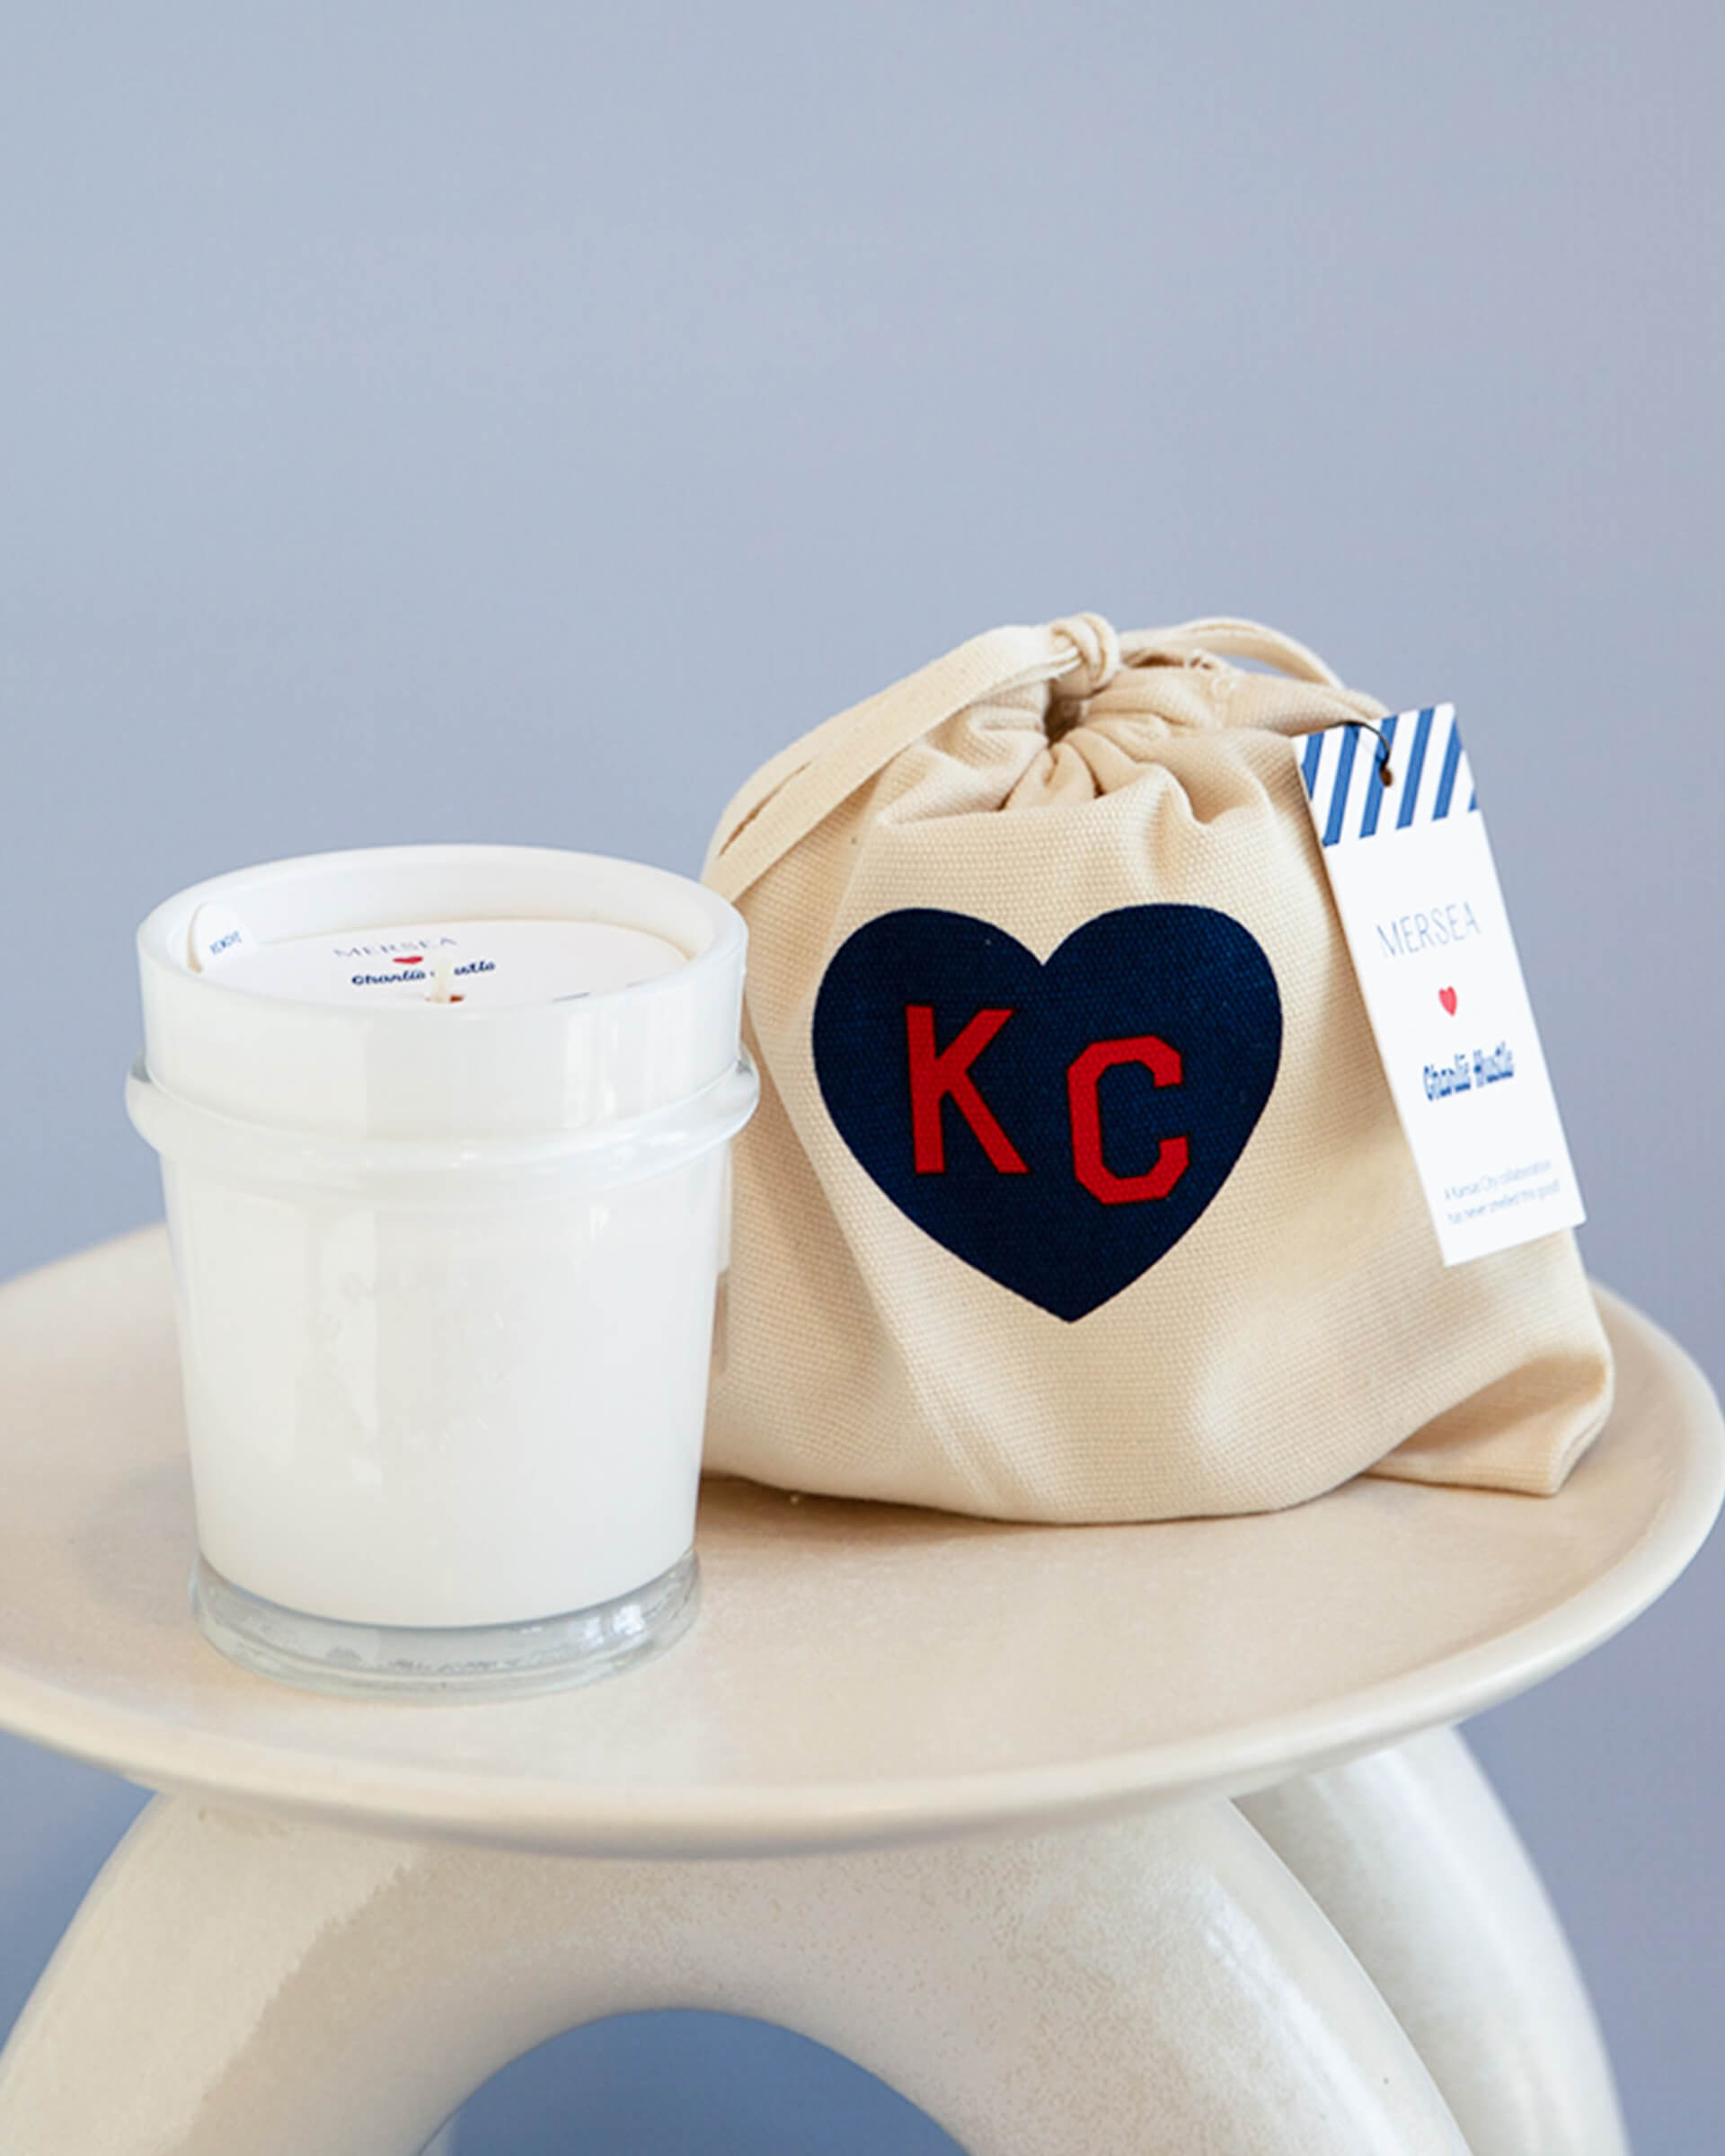 mersea colab saltaire candle sitting next to KC inside heart on candle bag on stool